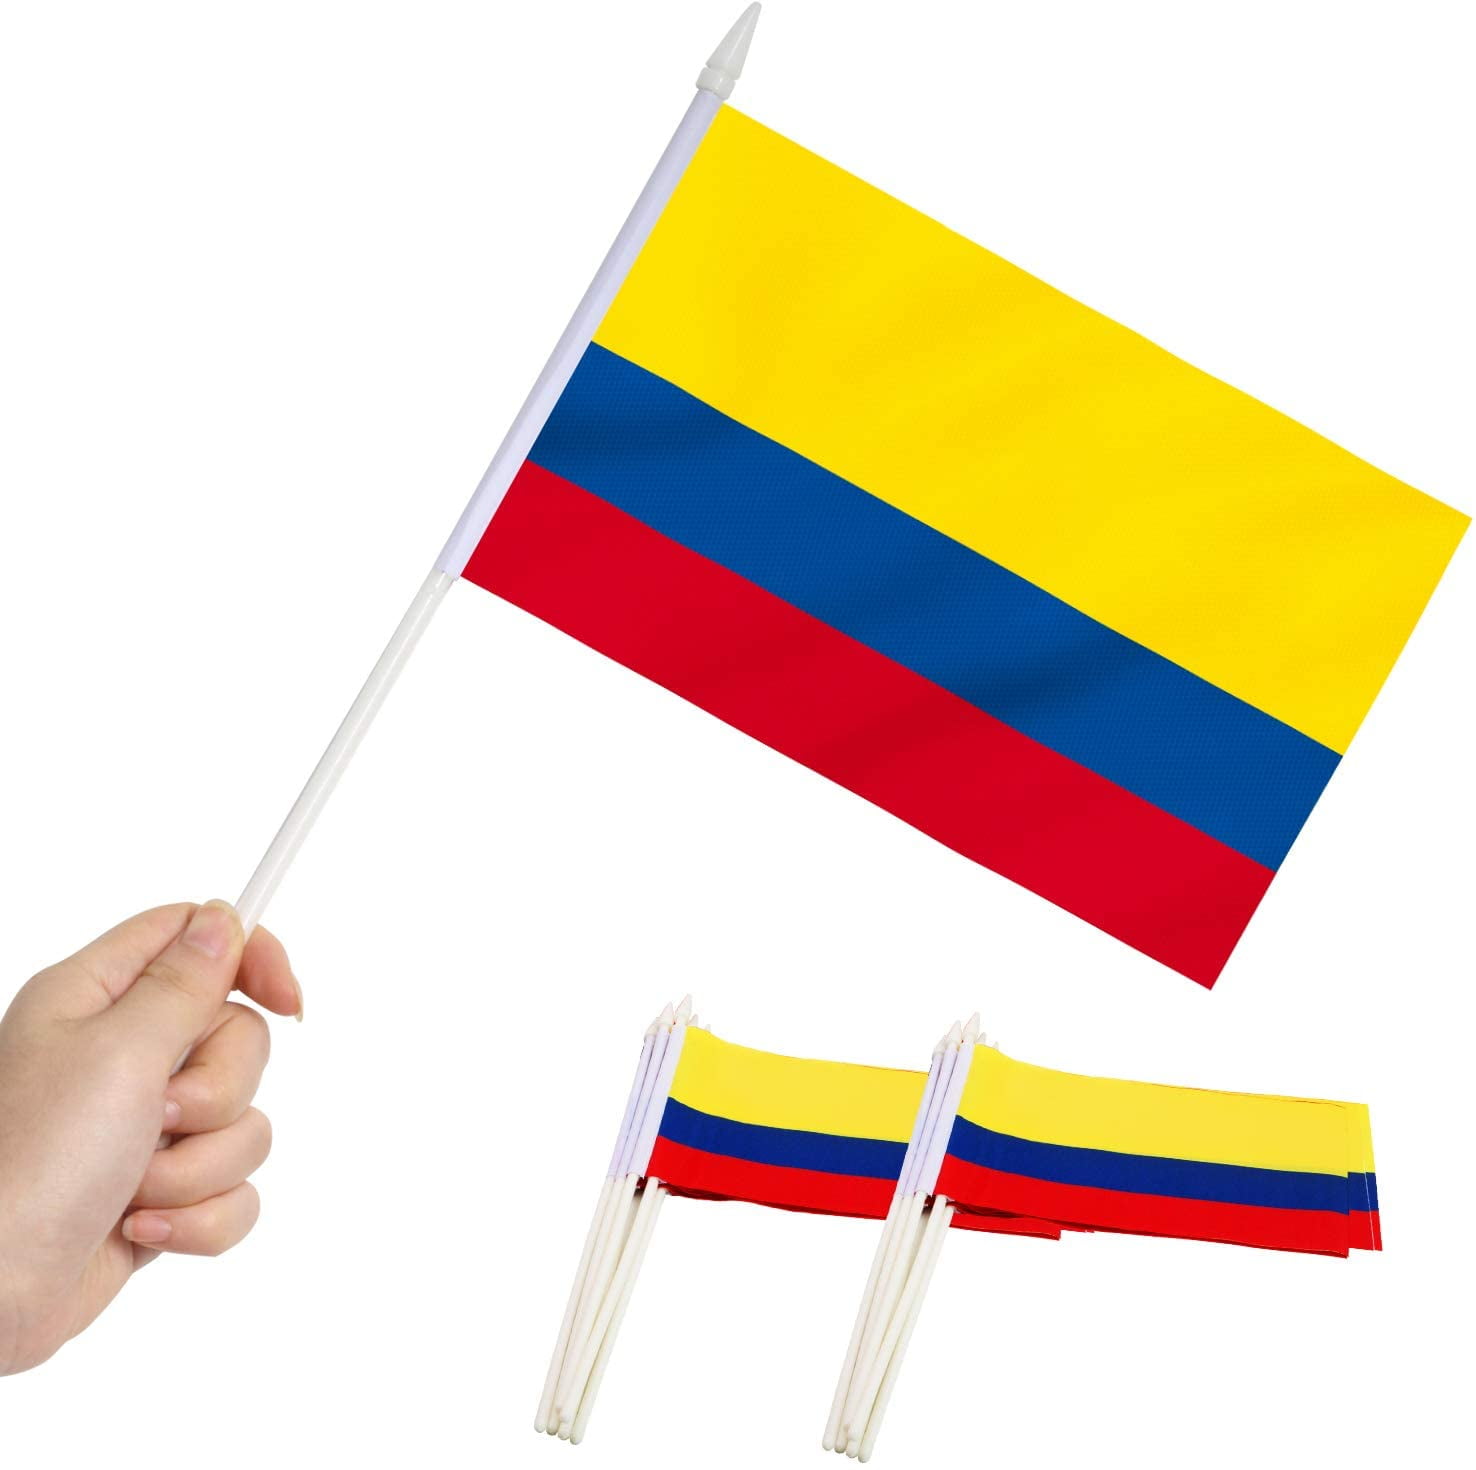 Fade Resistant & Vivid Colors 5x8 Inch with Solid Pole & Spear Top Anley Colombia Mini Flag 12 Pack Hand Held Small Miniature Colombian Flags on Stick 